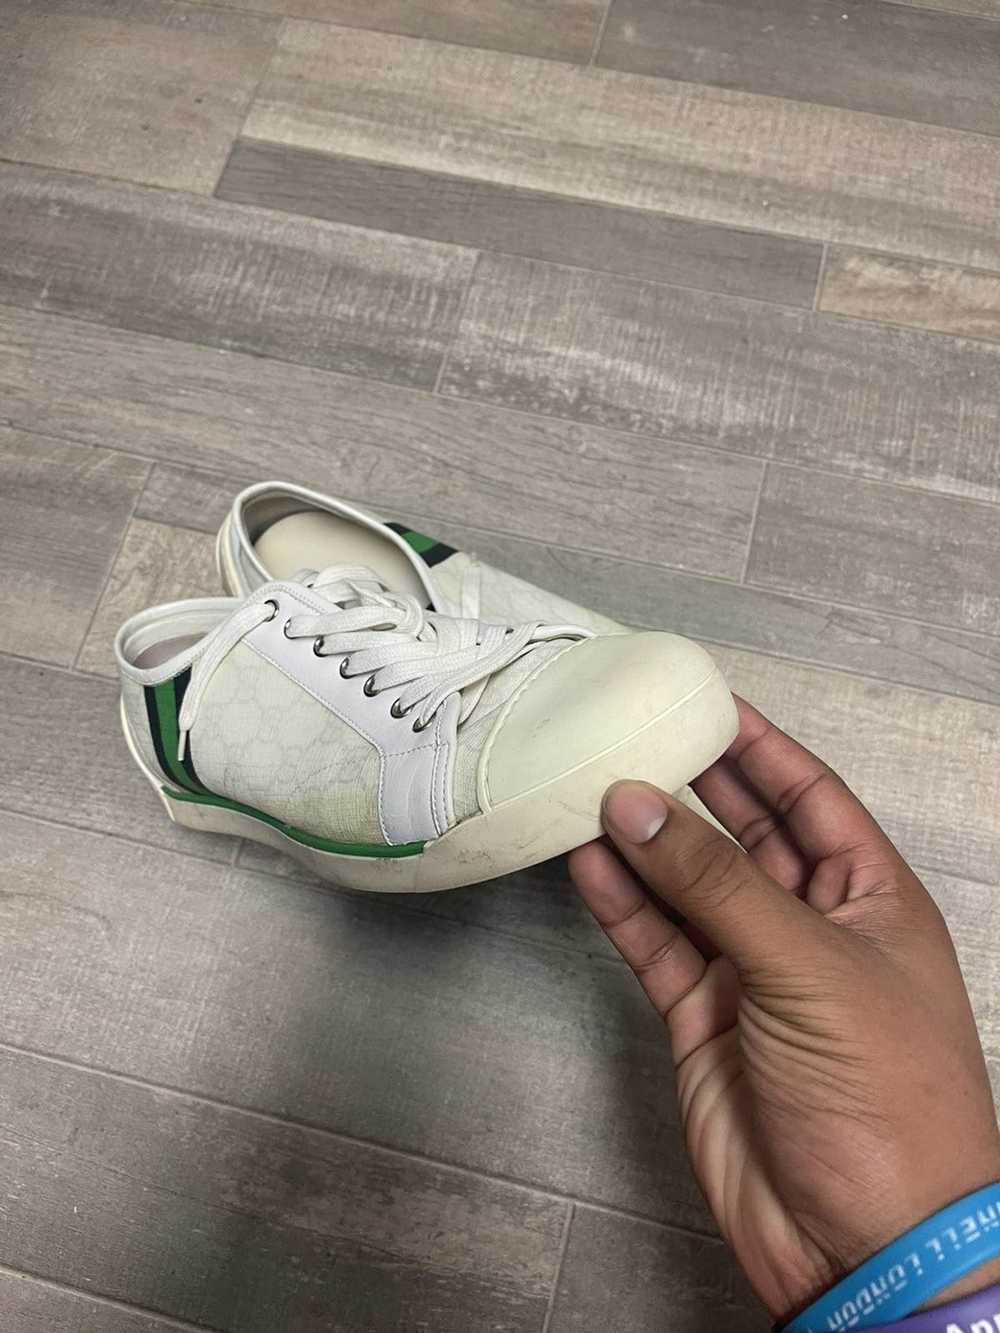 Gucci White Leather Interlocking G Ace Low Top Sneakers Size 39 Gucci